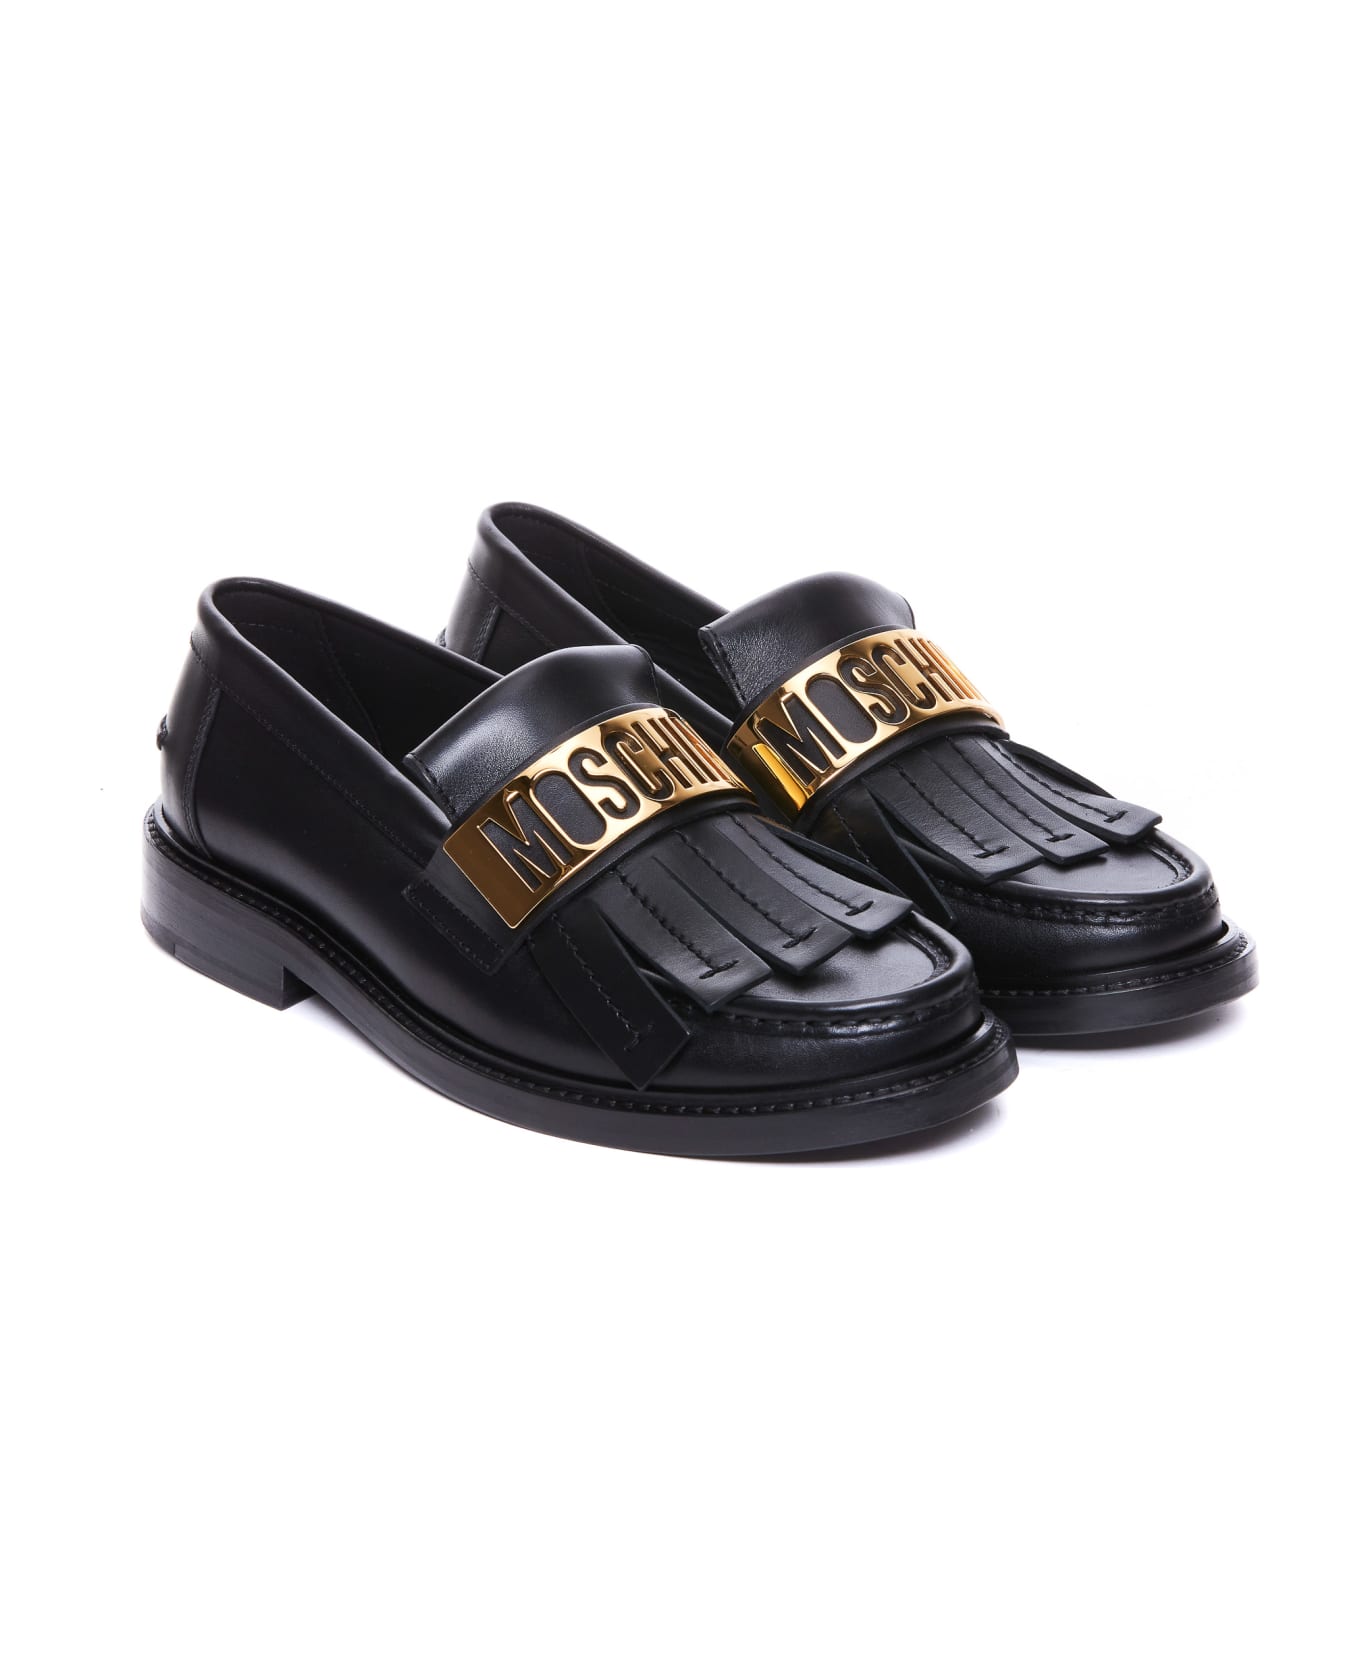 Moschino Maxi Logo Plate Loafers - Black